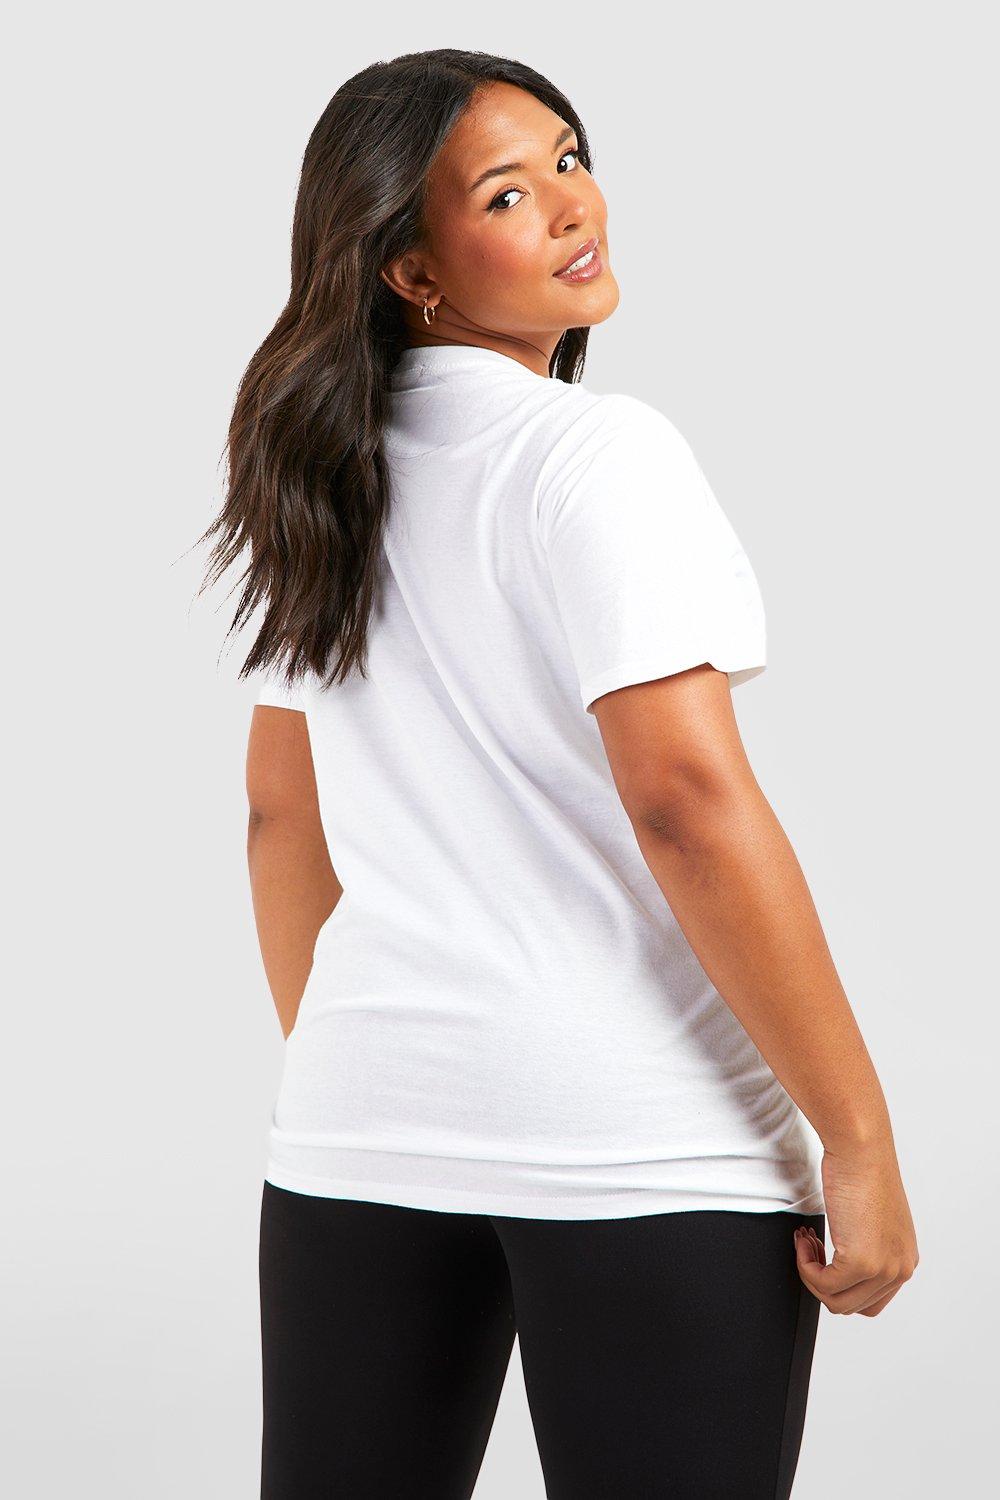 Lady's scoop Seamless Long Sleeve Top - White, Plus Size 